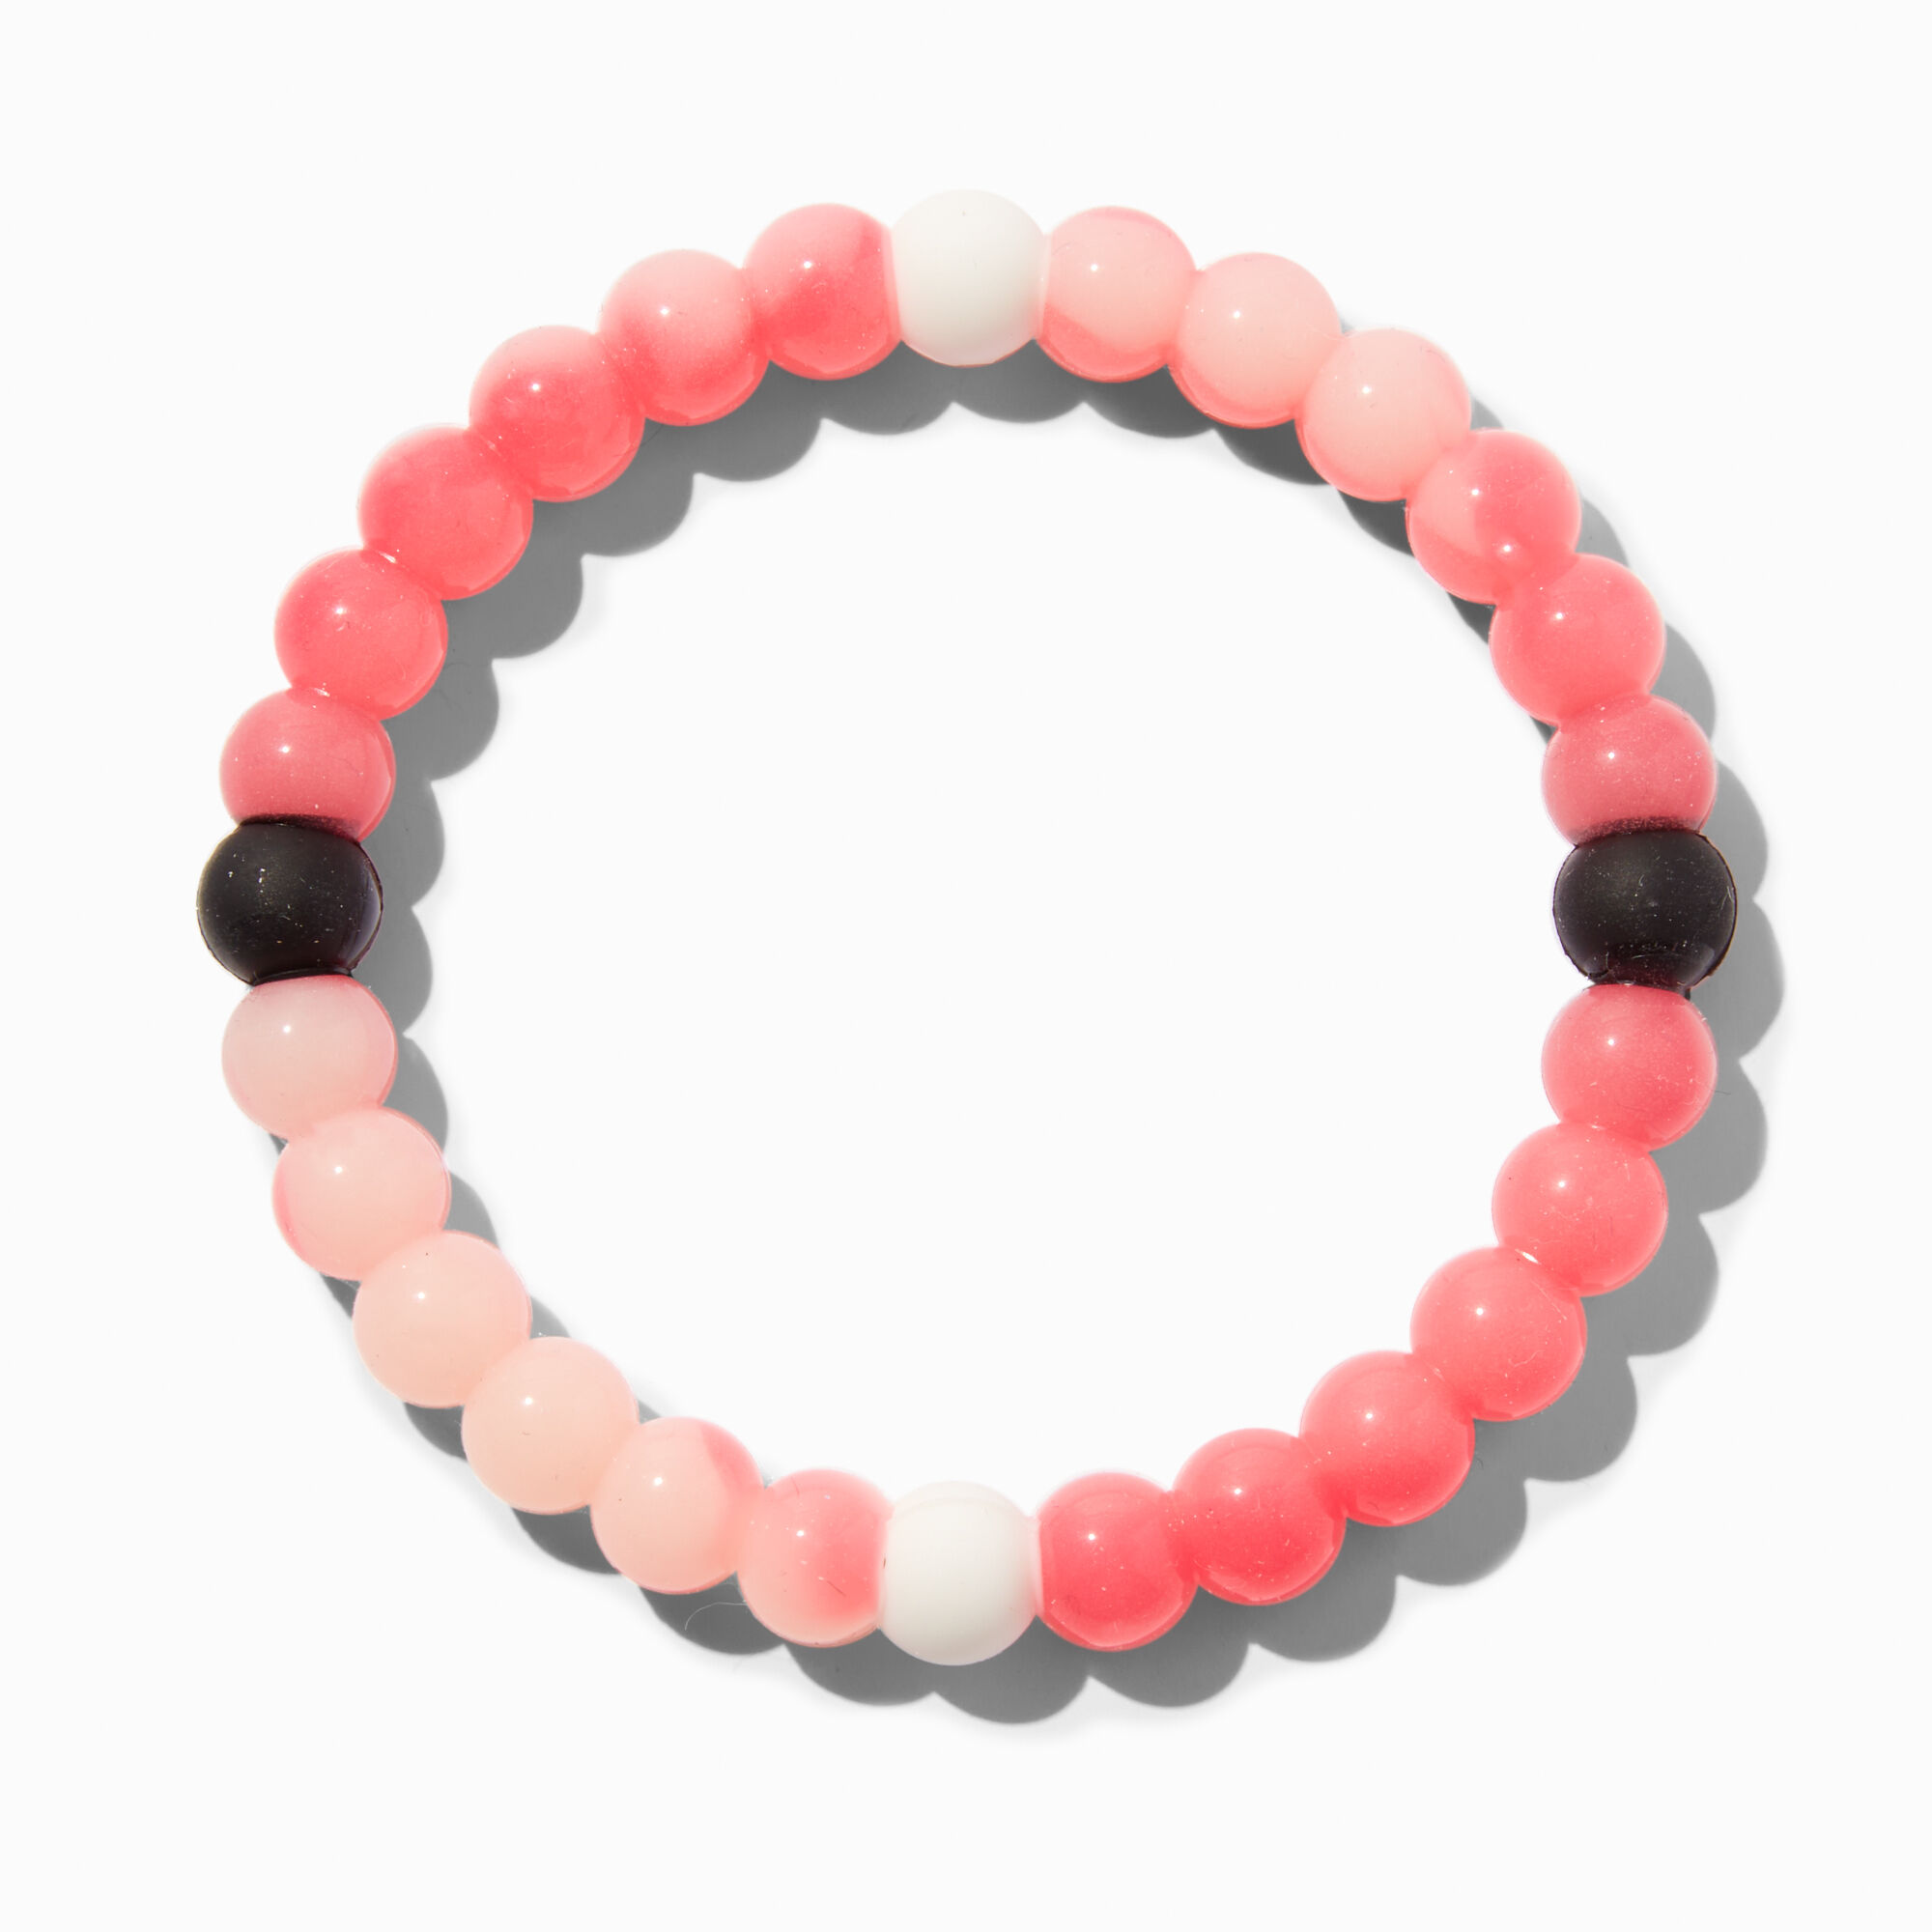 Lokai Breast Cancer Cause Collection Bracelet Pink Small & Medium Sizes |  eBay